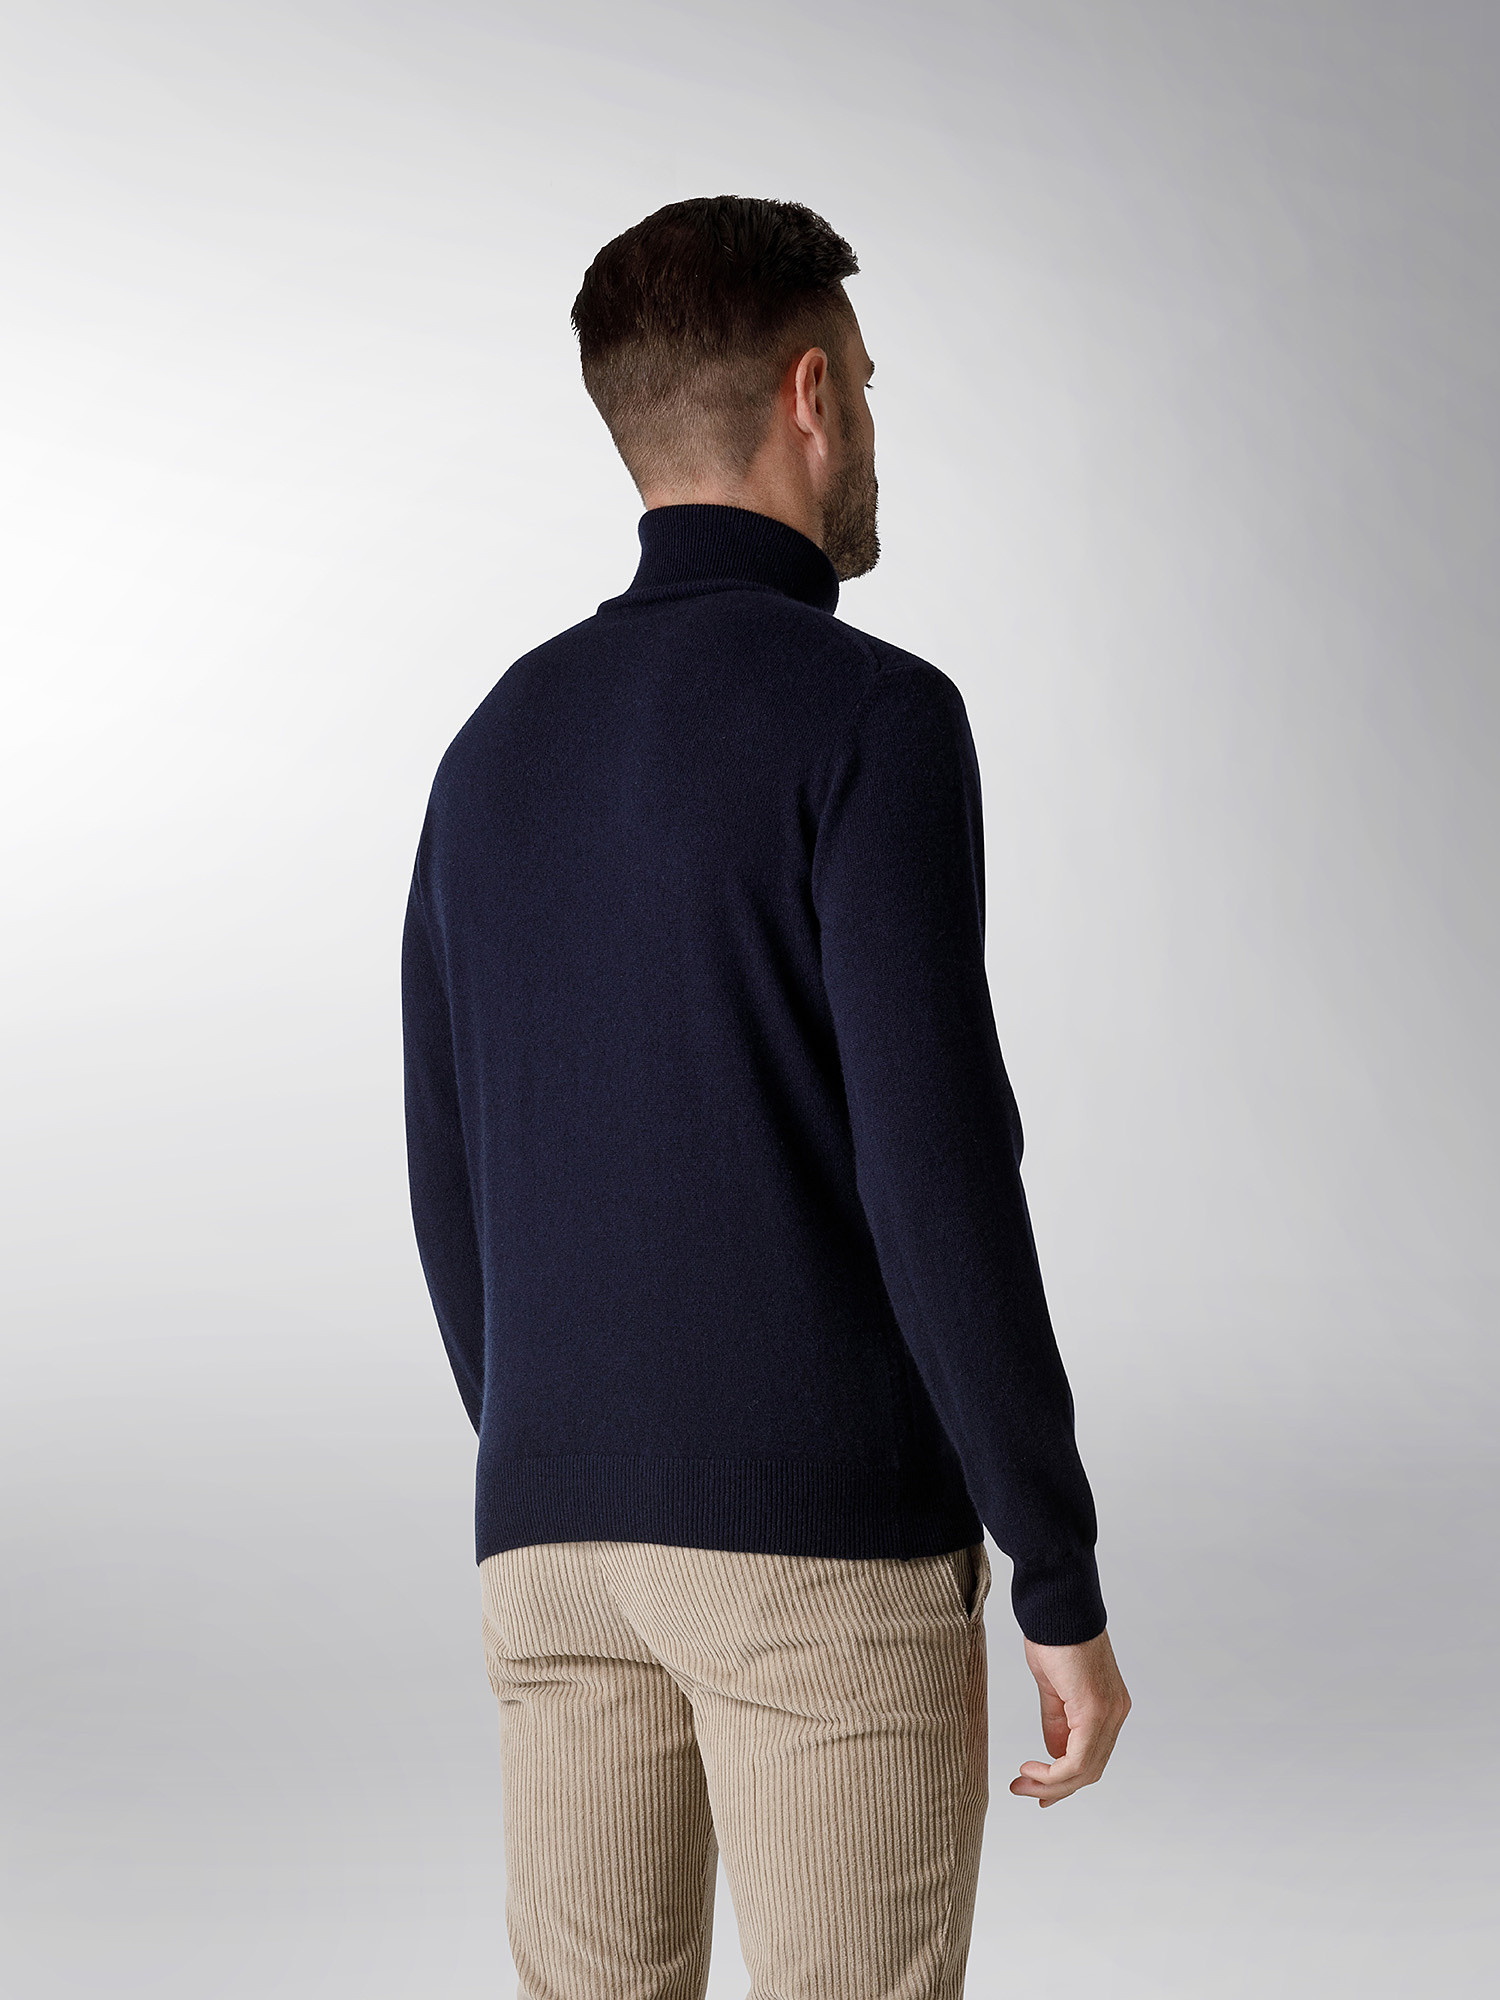 Coin Cashmere - Turtleneck in pure cashmere, Dark Blue, large image number 2